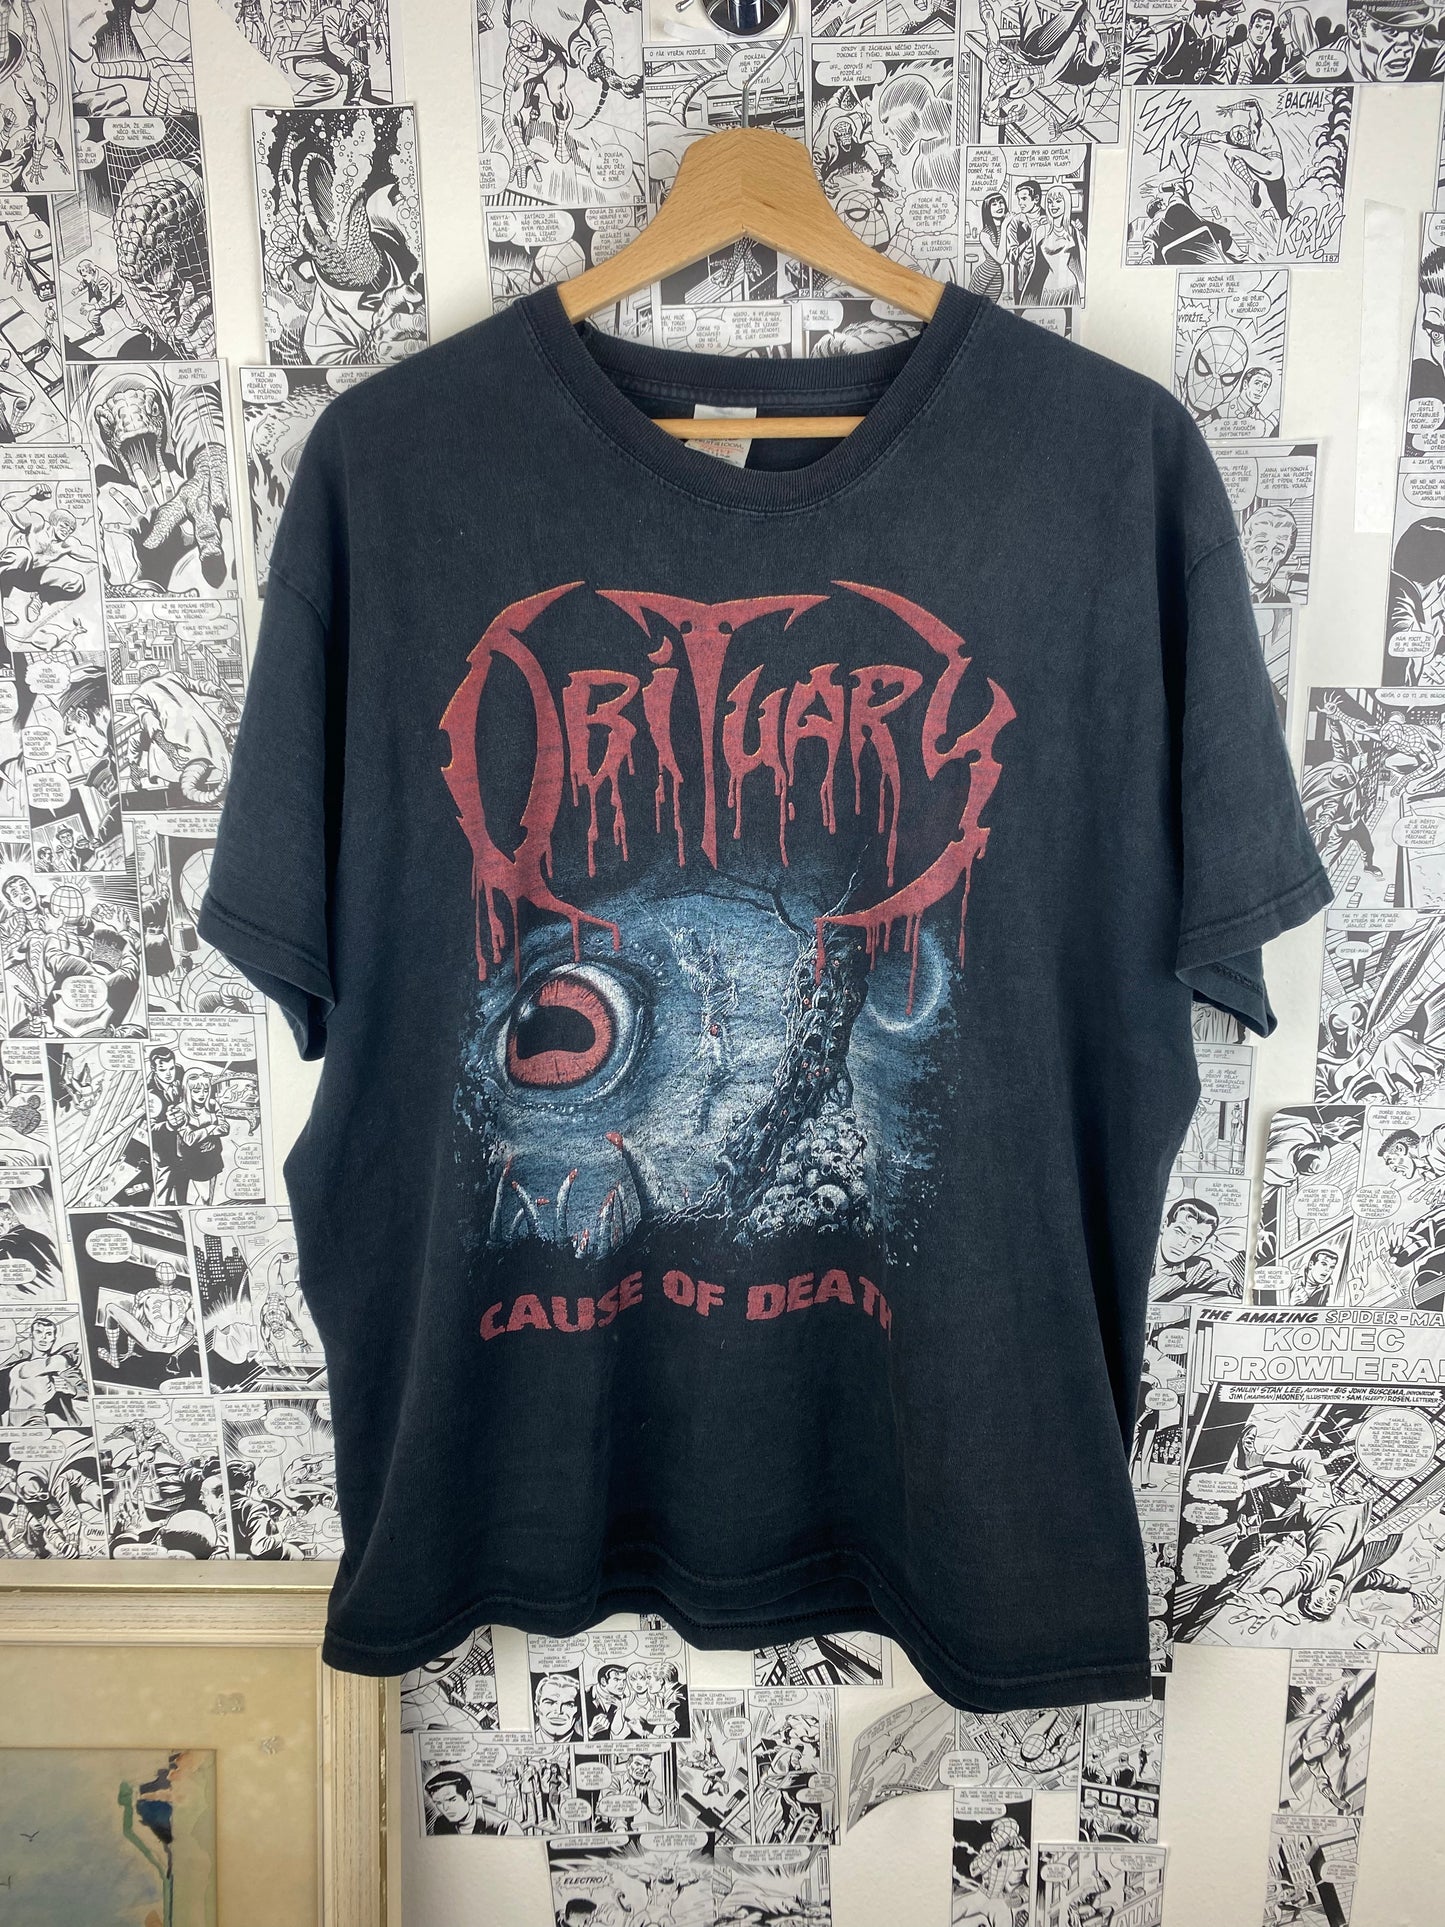 Vintage Obituary “Cause of Death” 00s t-shirt - size XL